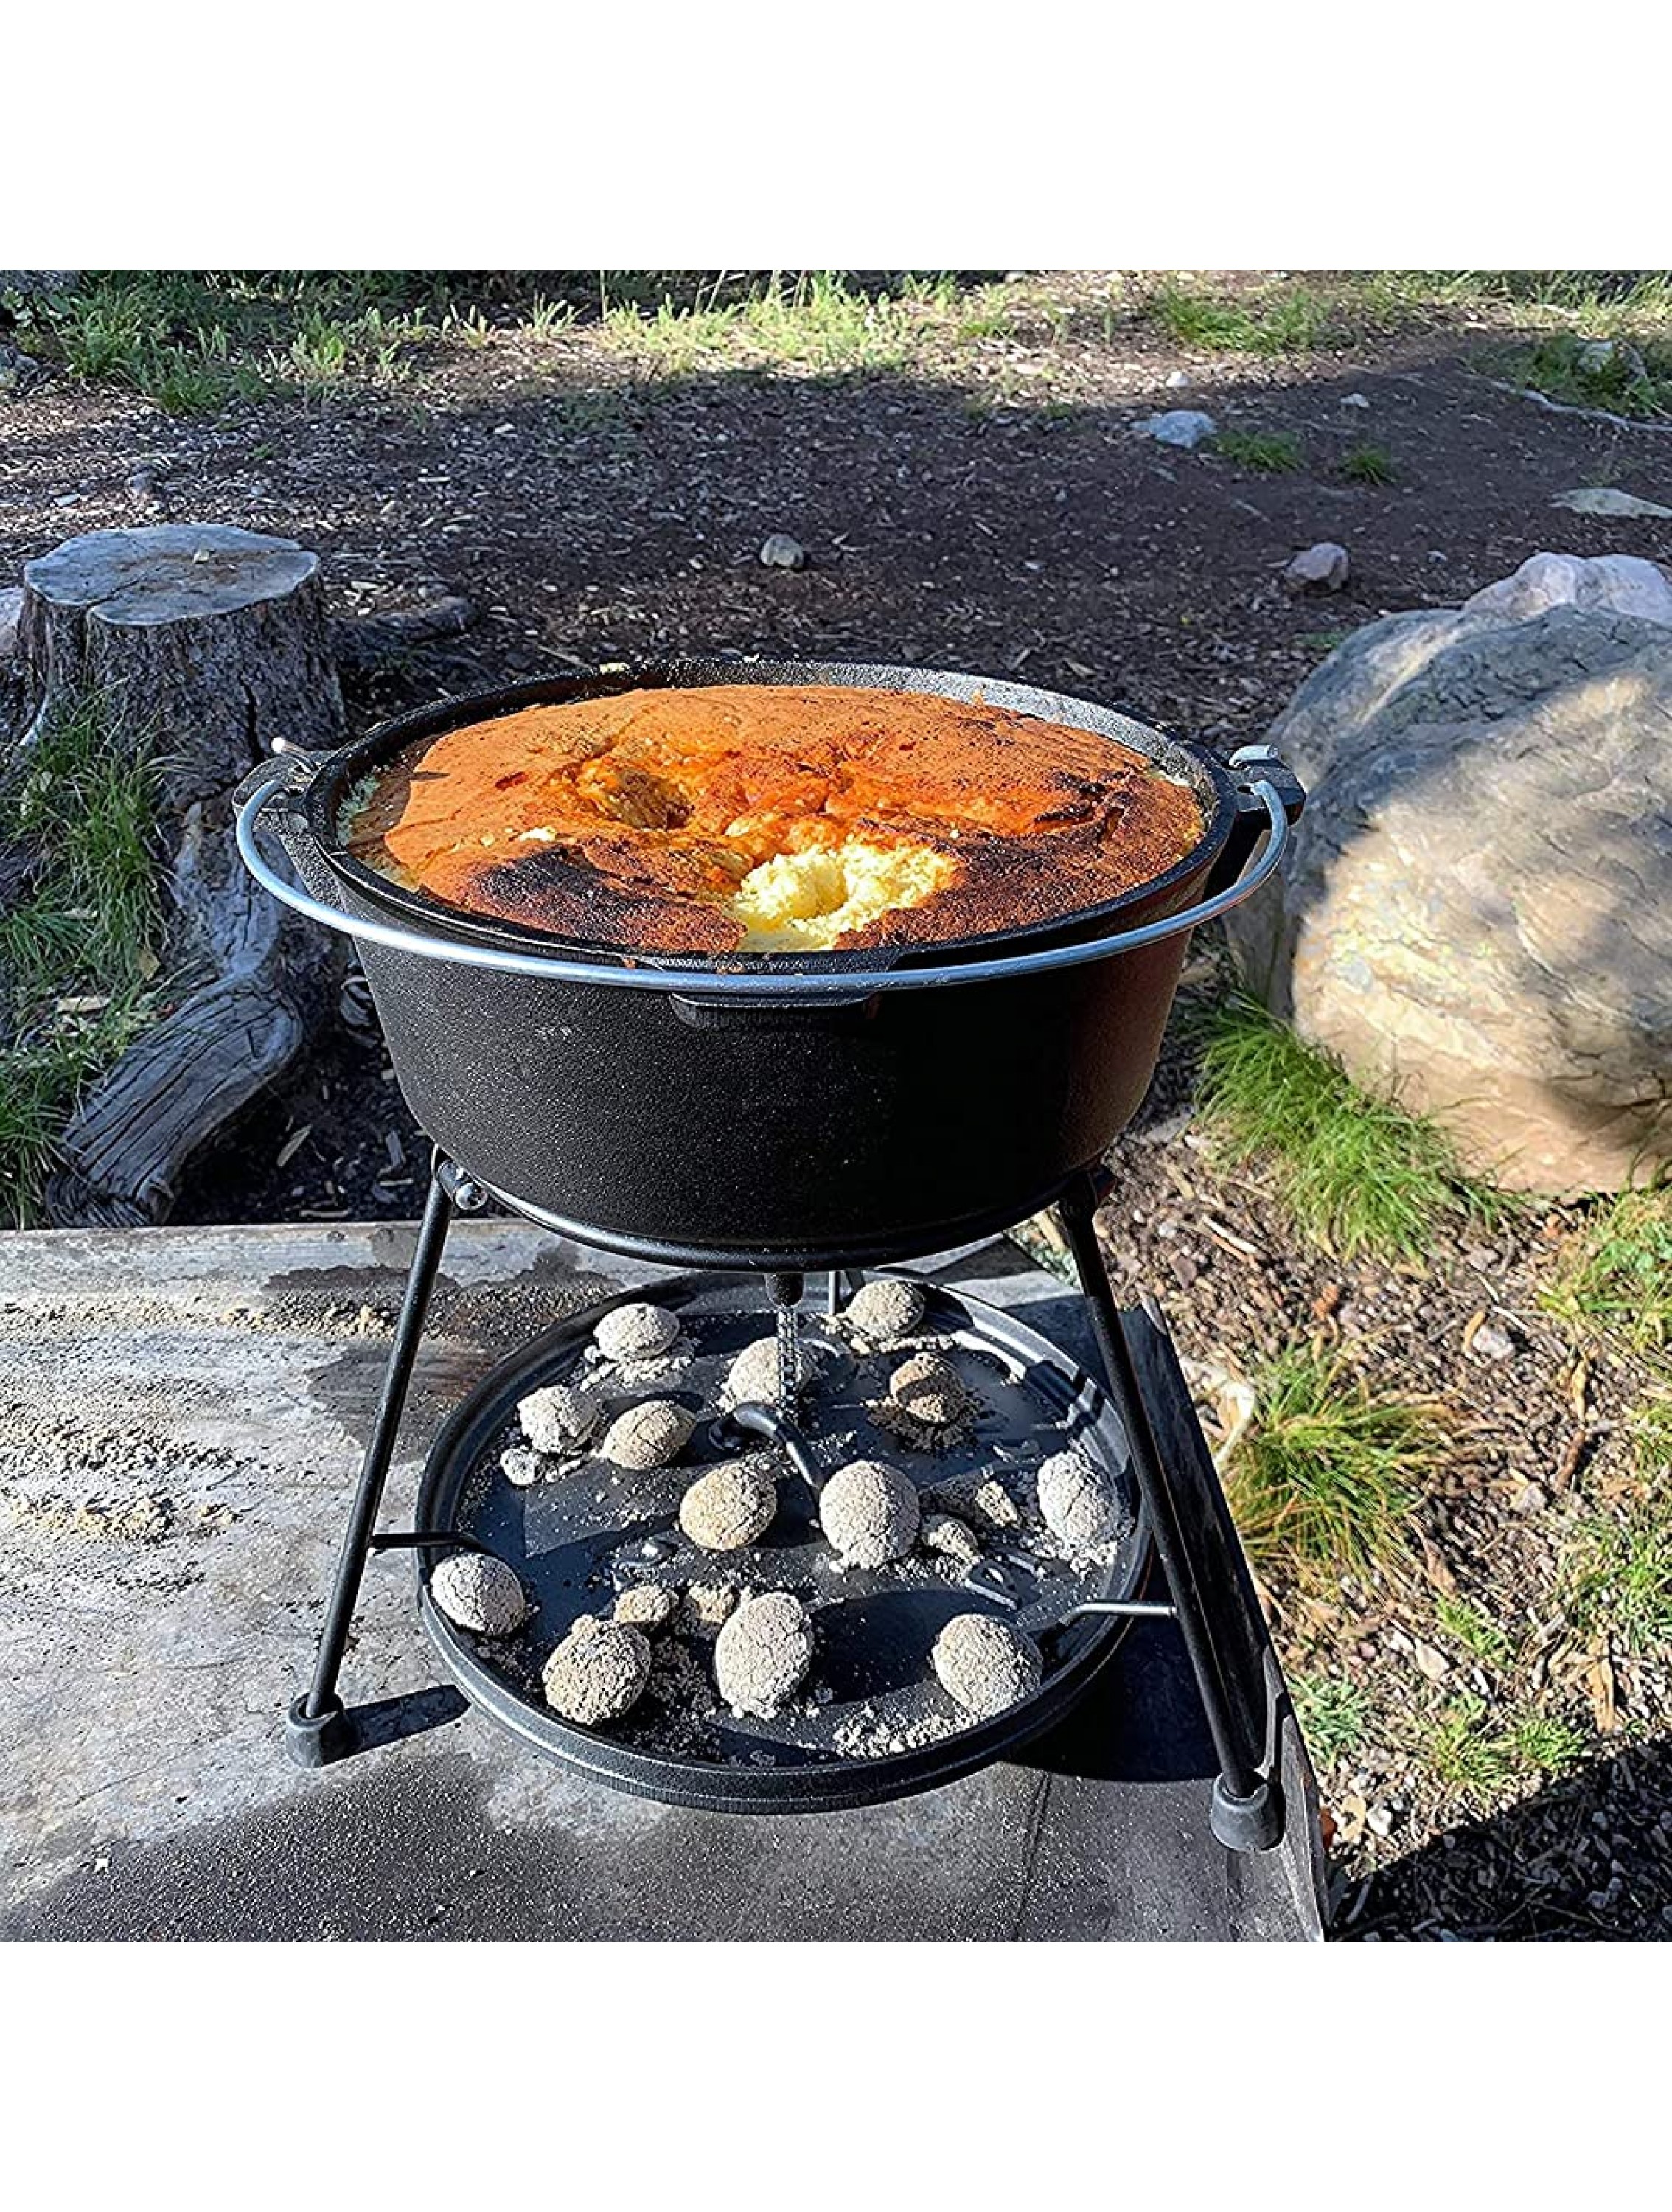 CampMaid 12 Pre-Seasoned 7 Quart Dutch Oven Without Legs - BHF13XY4E